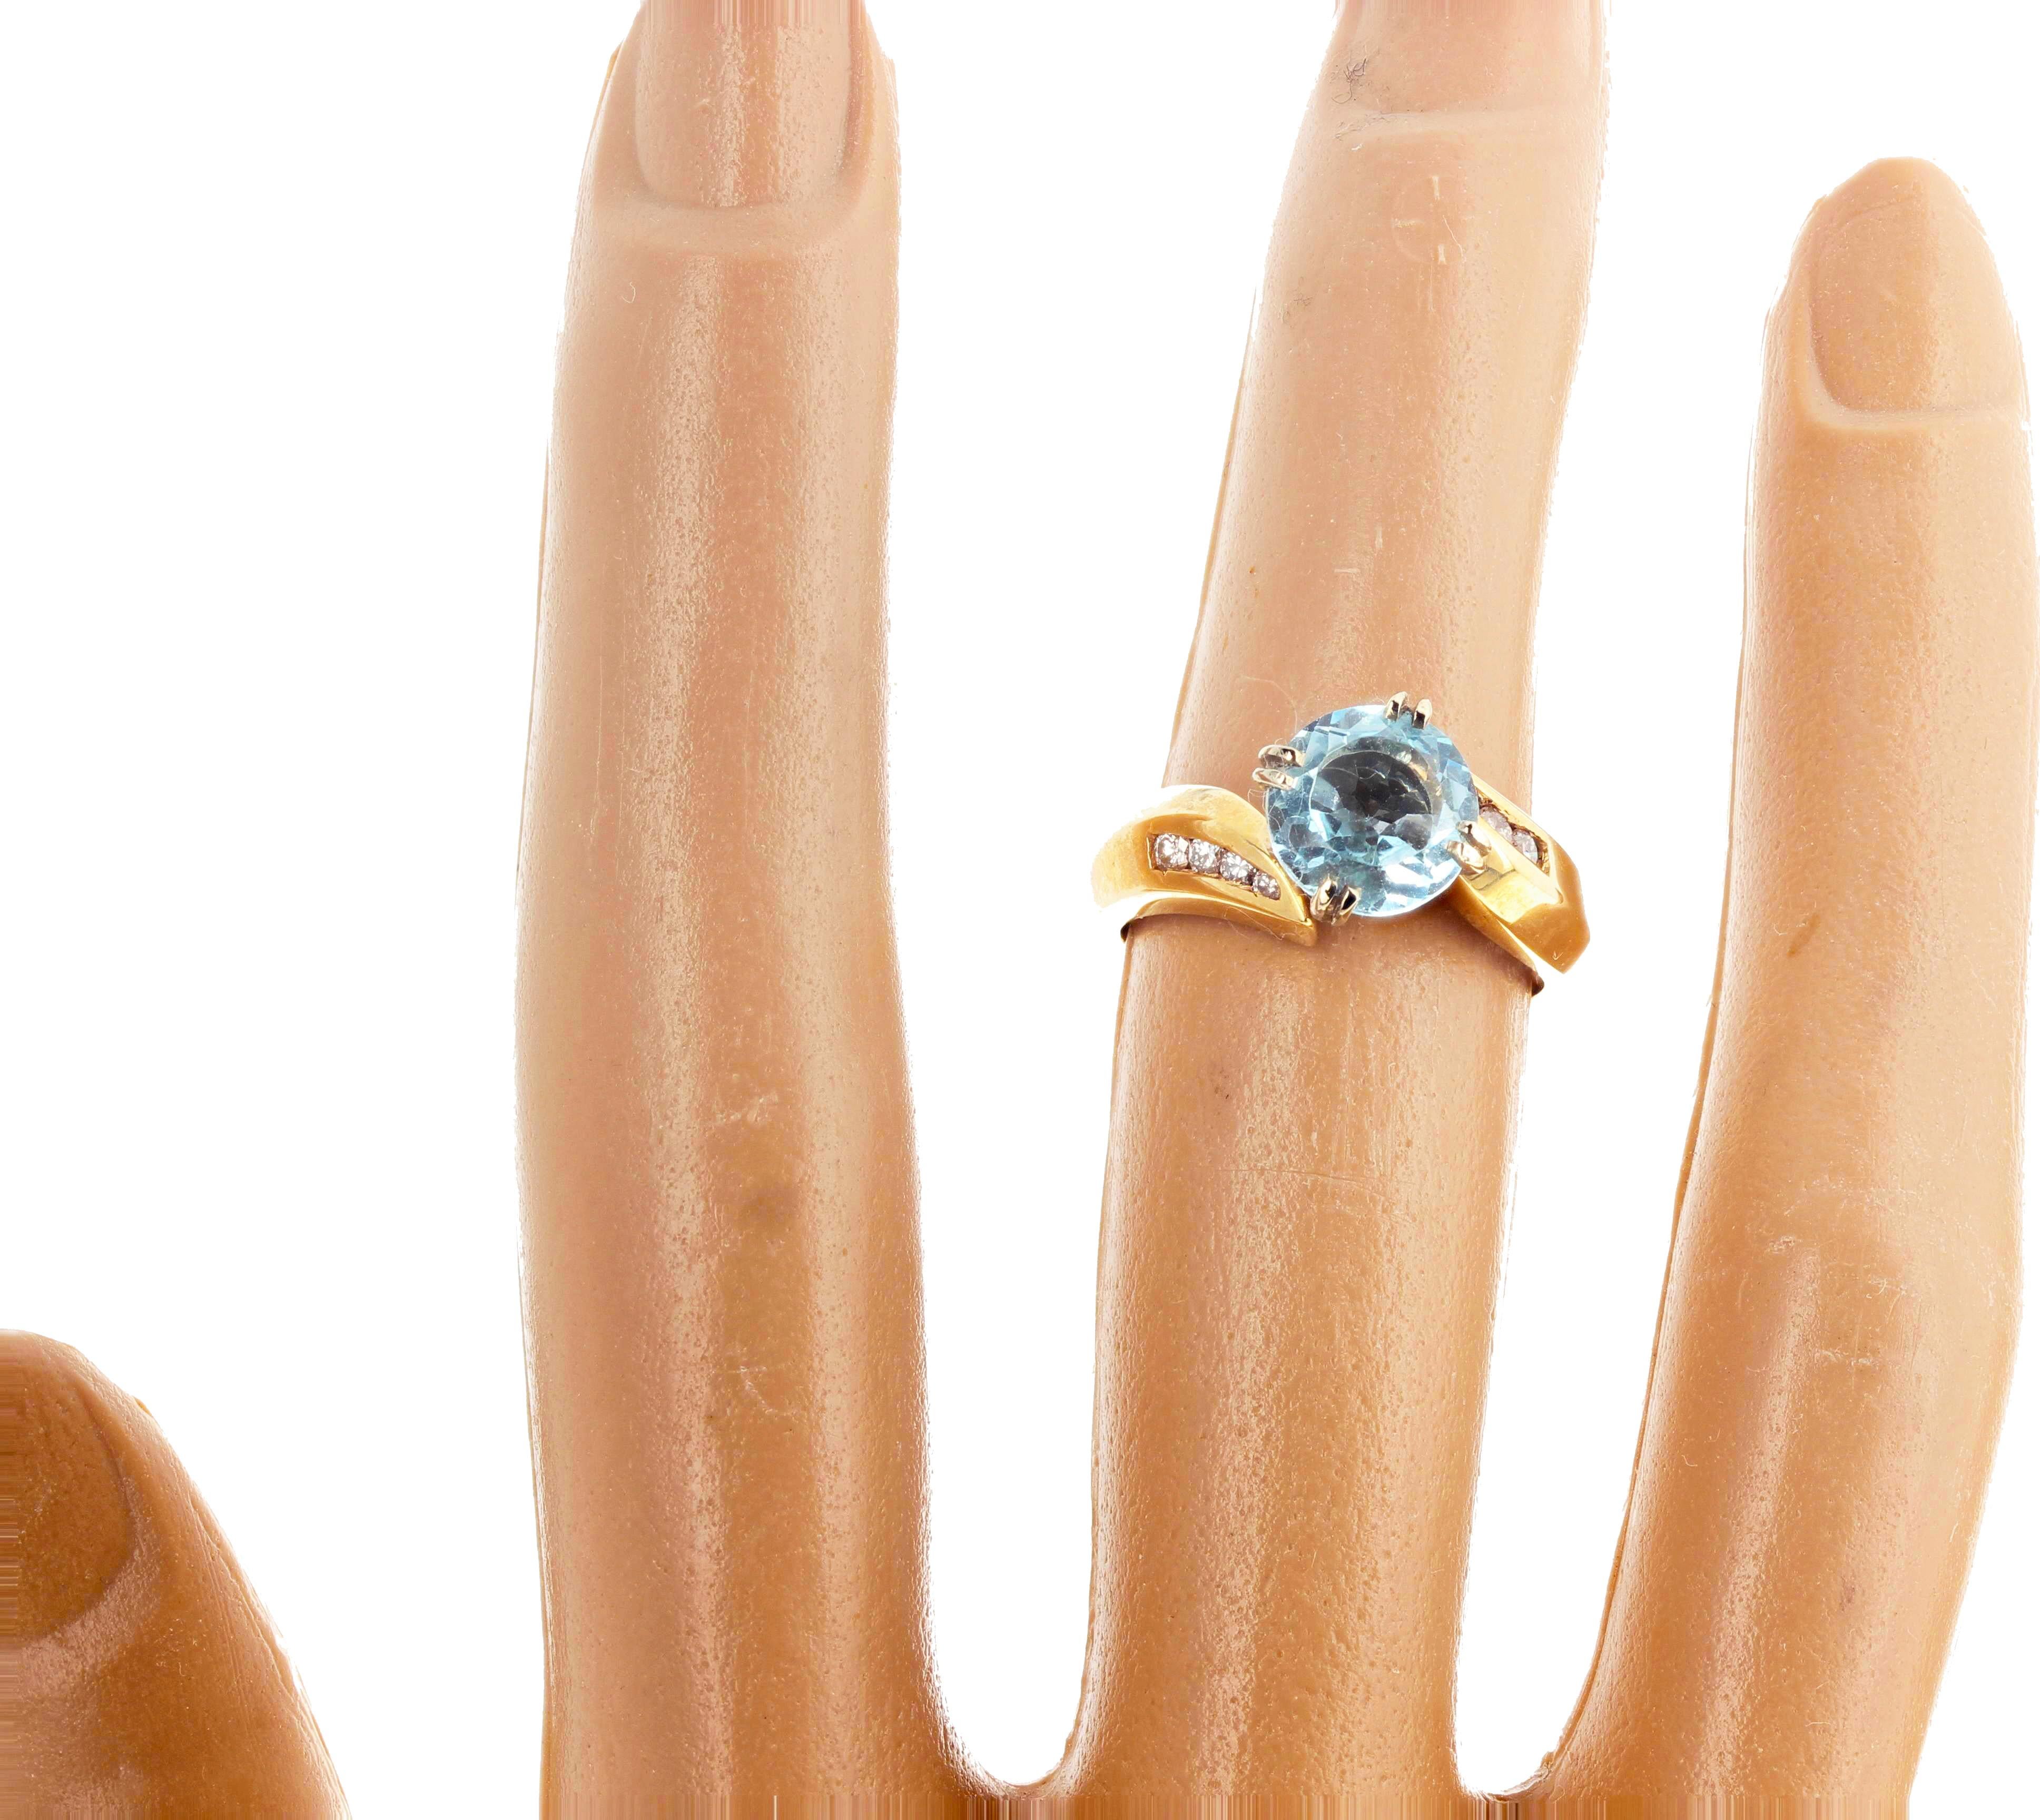 This delightful round gem cut bright blue Aquamarine - 1.68 carats - 8 mm - no eye visible inclusions - enhanced with little sparkling real white Diamonds set in this lovely 14Kt yellow gold ring size 6.5 sizable FOR FREE.  This is perfect for